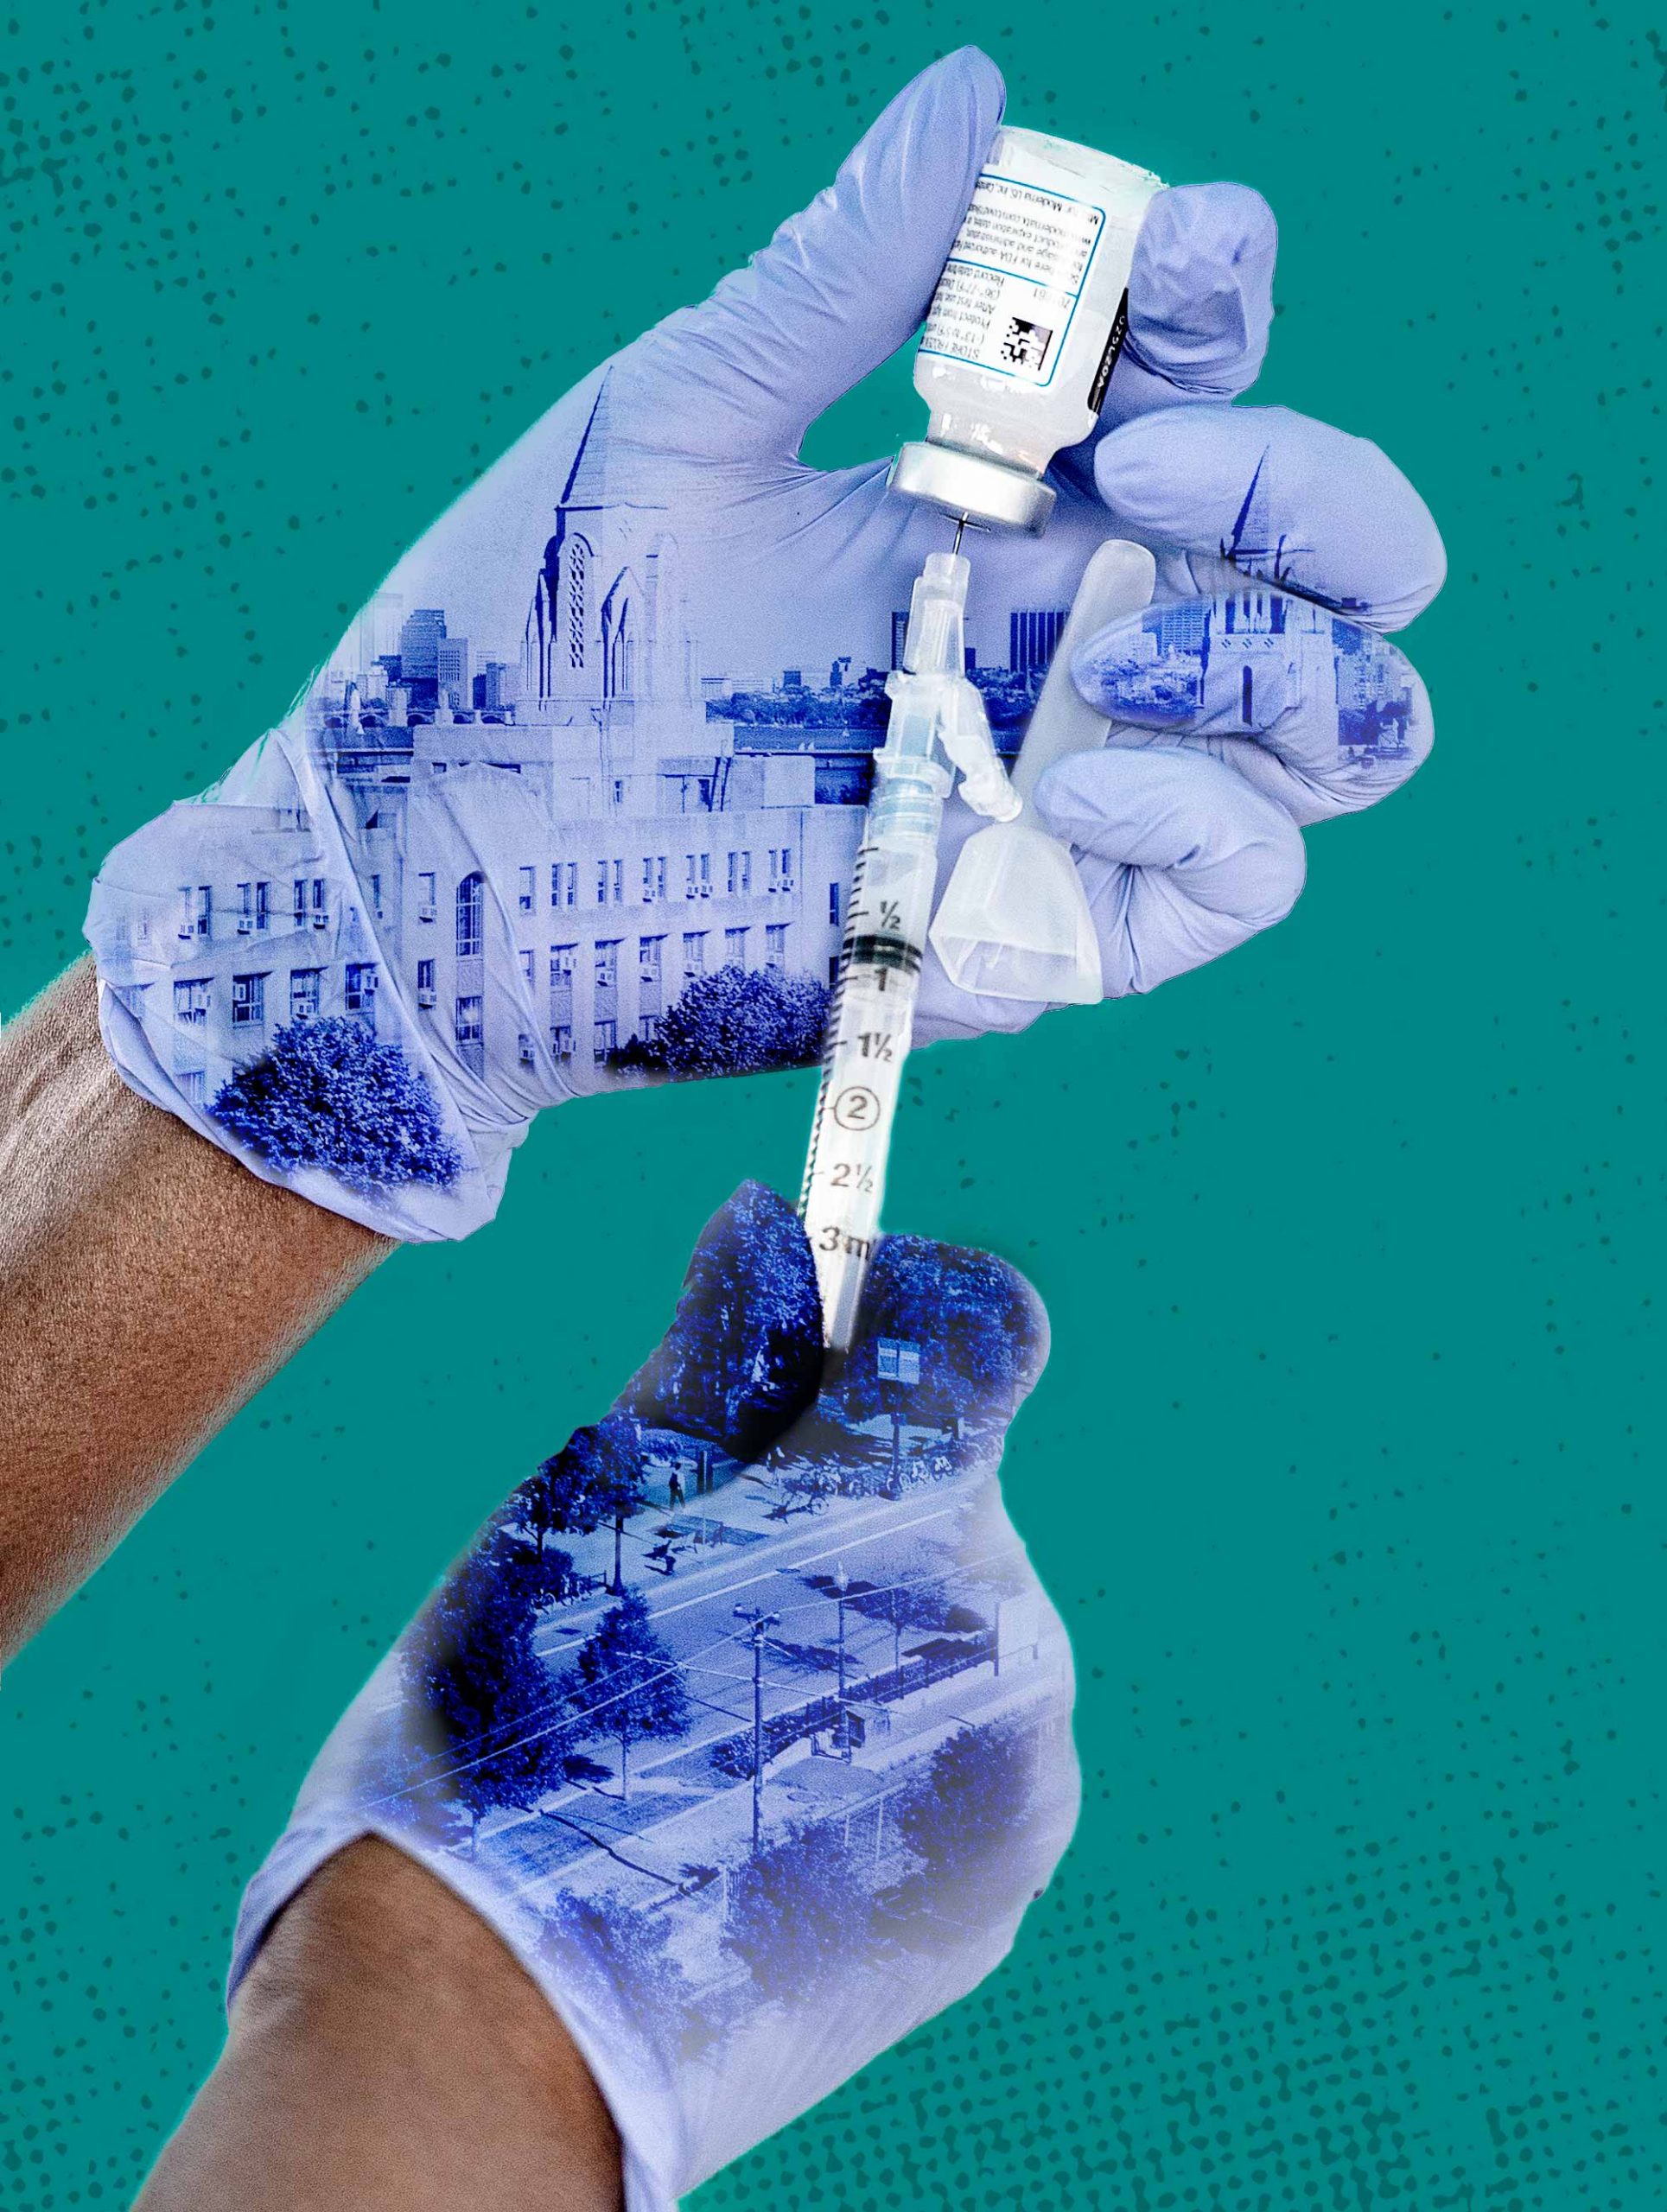 Hands wearing latex gloves load a syringe with Moderna COVID-19 vaccine. A photo of Boston University Charles River Campus is superimposed on the gloves.